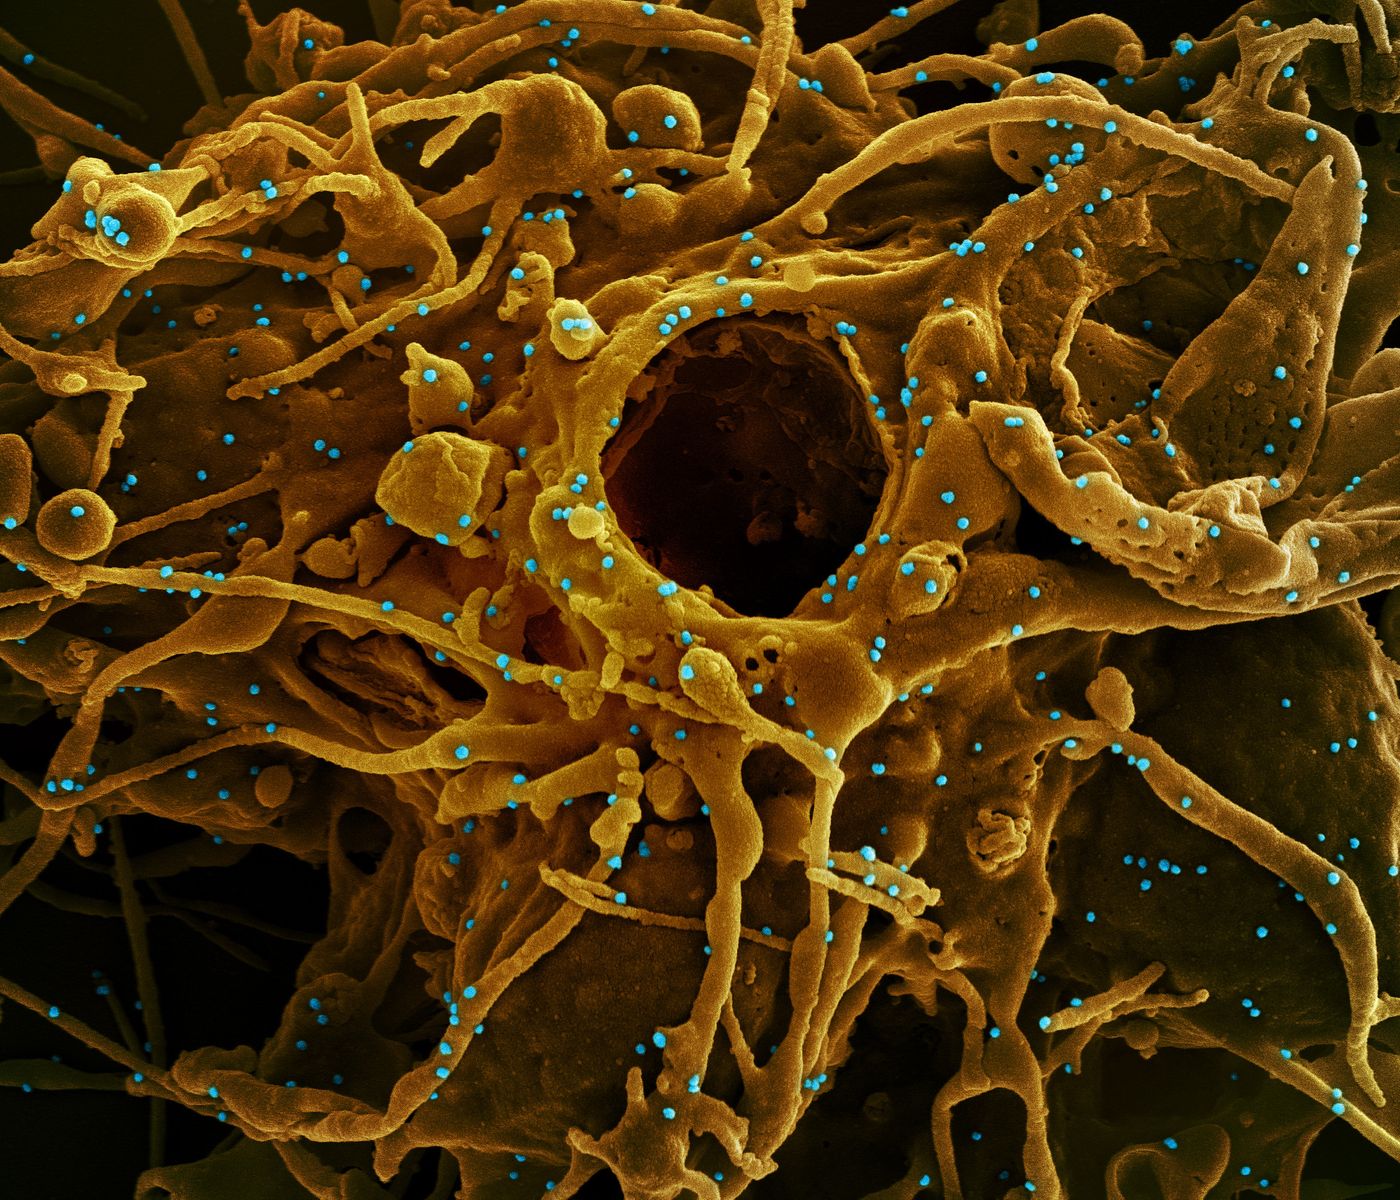 Colorized scanning electron micrograph of a cell (gold) infected with a variant of SARS-CoV-2 virus particles (blue), isolated from a patient sample. Image captured at the NIAID Integrated Research Facility (IRF) in Fort Detrick, Maryland. Credit: NIAID